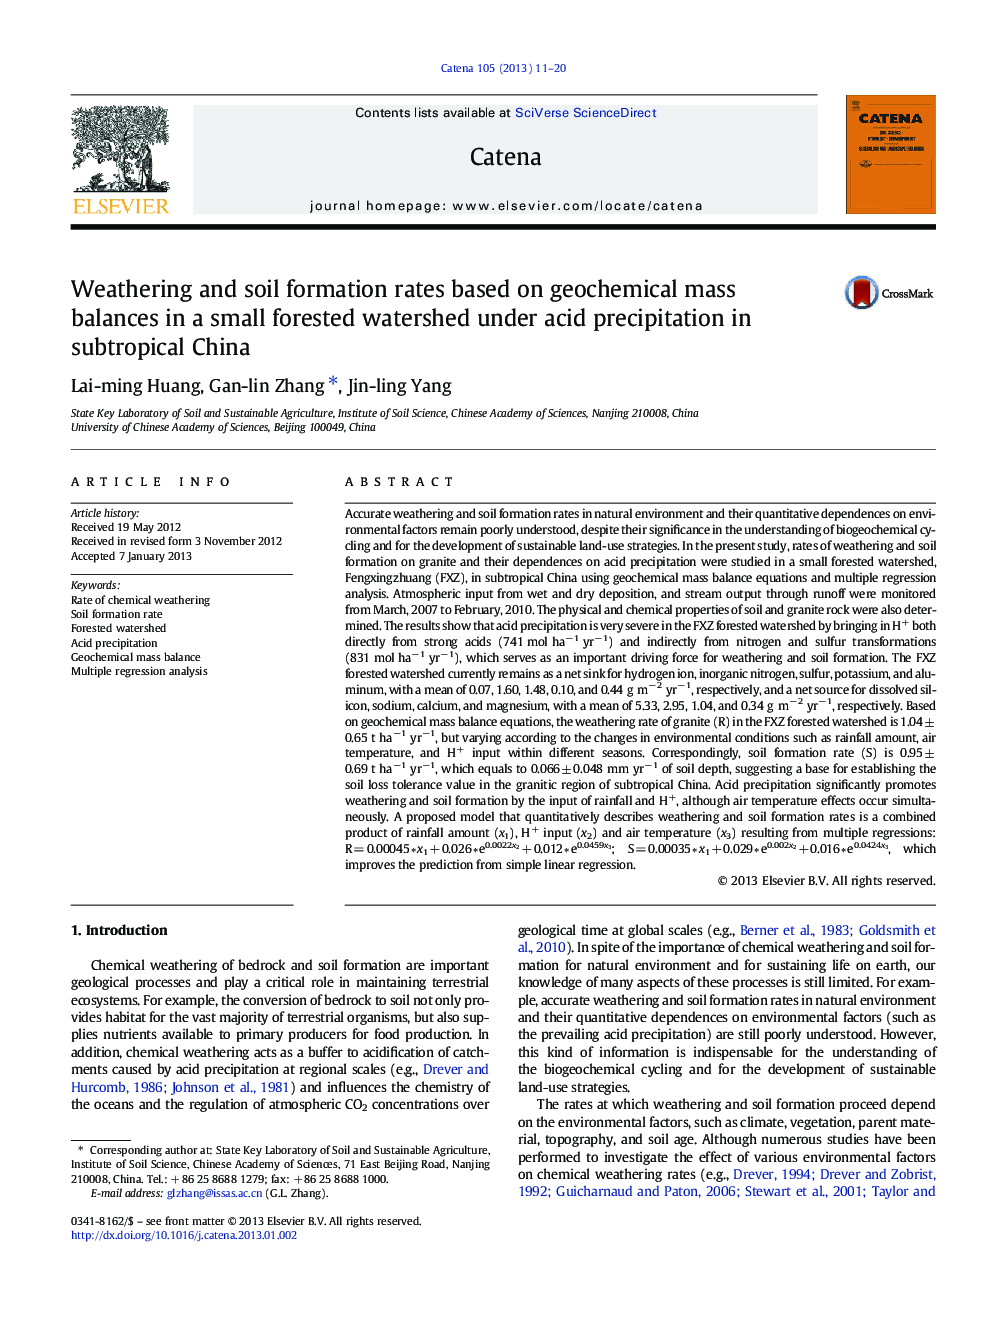 Weathering and soil formation rates based on geochemical mass balances in a small forested watershed under acid precipitation in subtropical China